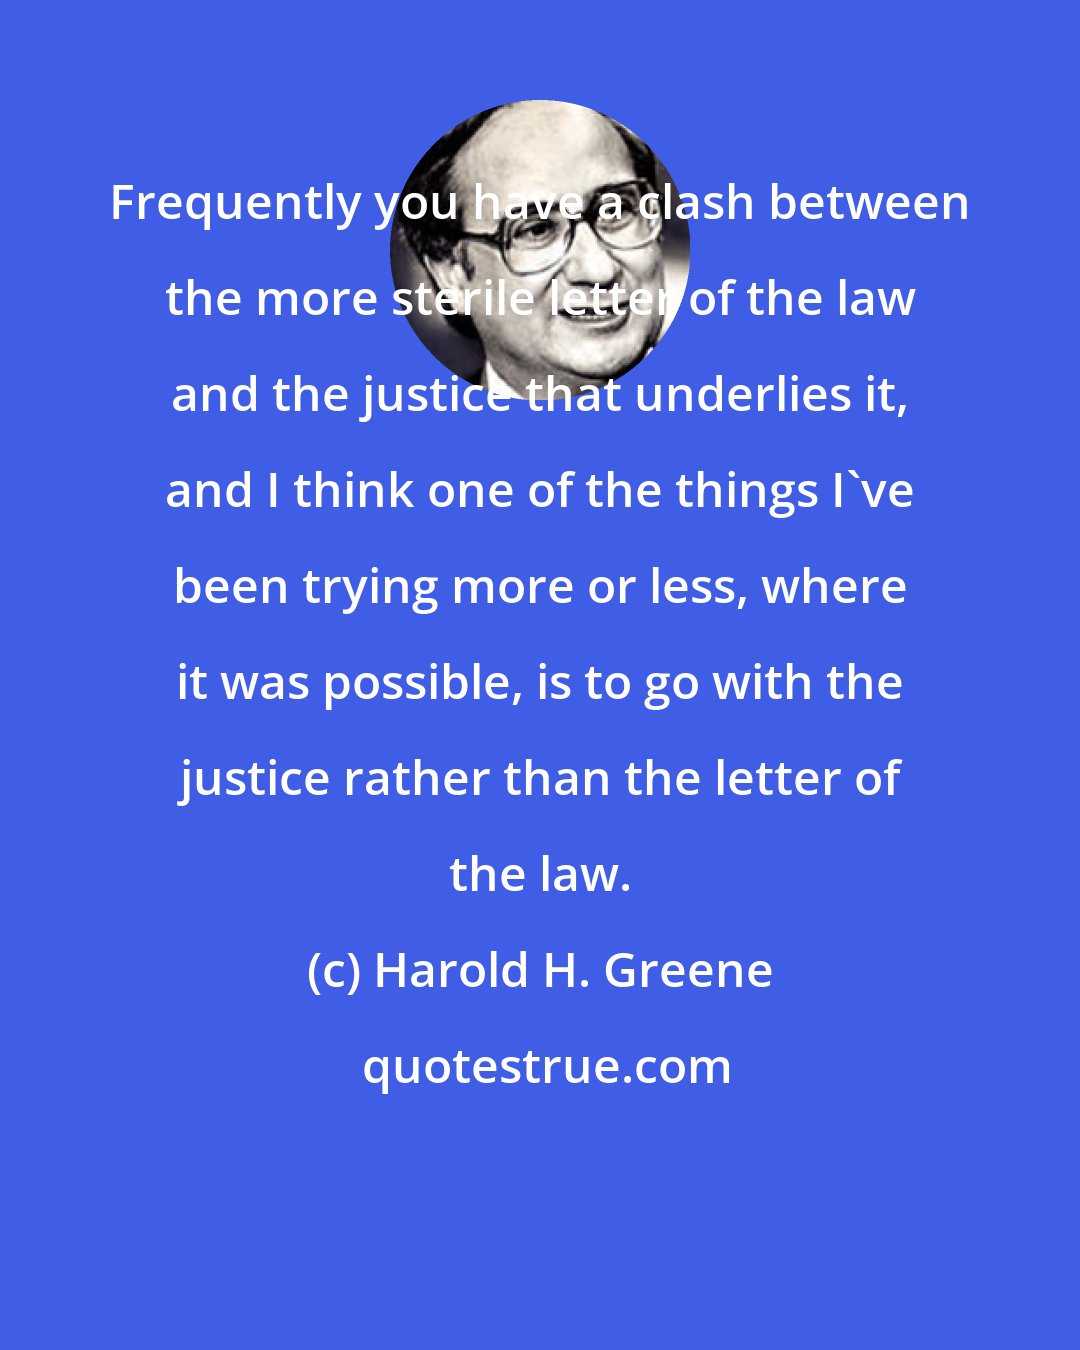 Harold H. Greene: Frequently you have a clash between the more sterile letter of the law and the justice that underlies it, and I think one of the things I've been trying more or less, where it was possible, is to go with the justice rather than the letter of the law.